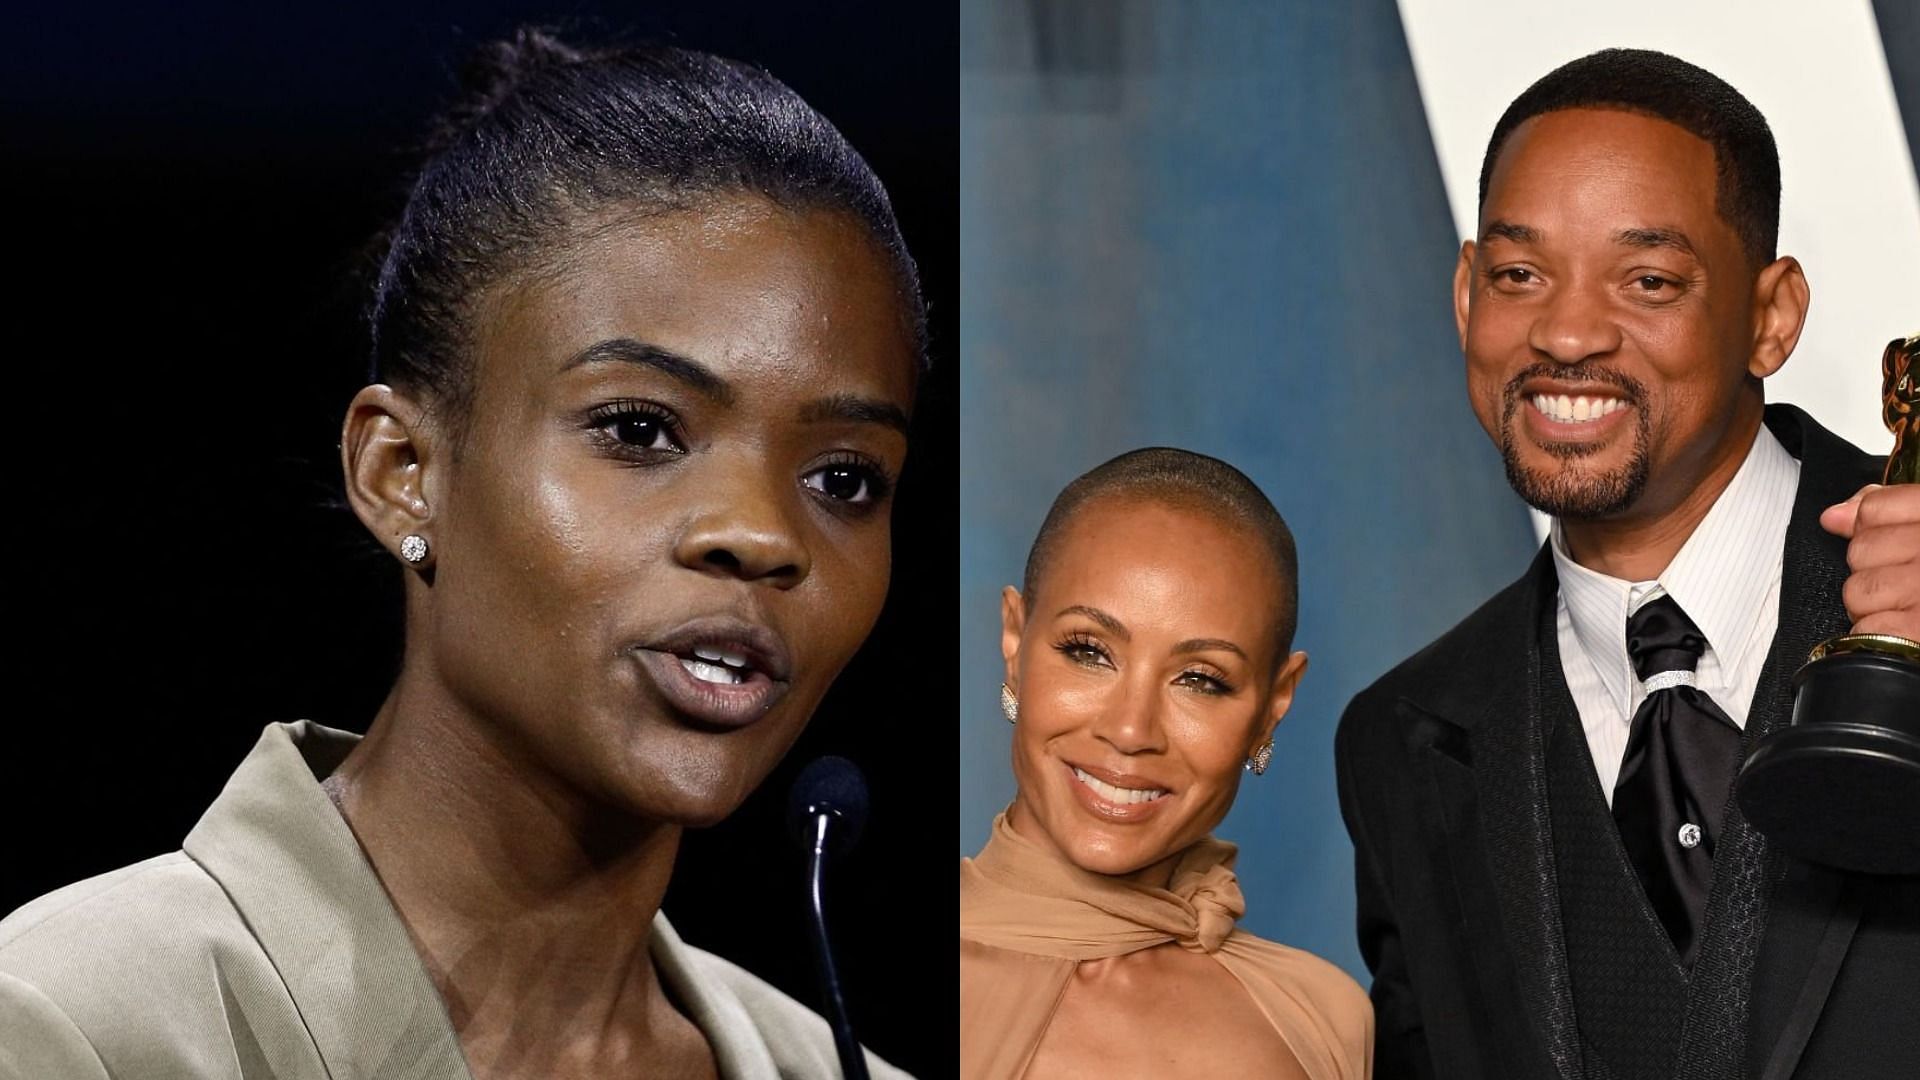 Candace Owens accused Jada Pinkett Smith of &quot;spiritually annihilating&quot; Will Smith (Image via Sameer Al-Doumy/Getty Images &amp; Karwai Tang/Getty Images)